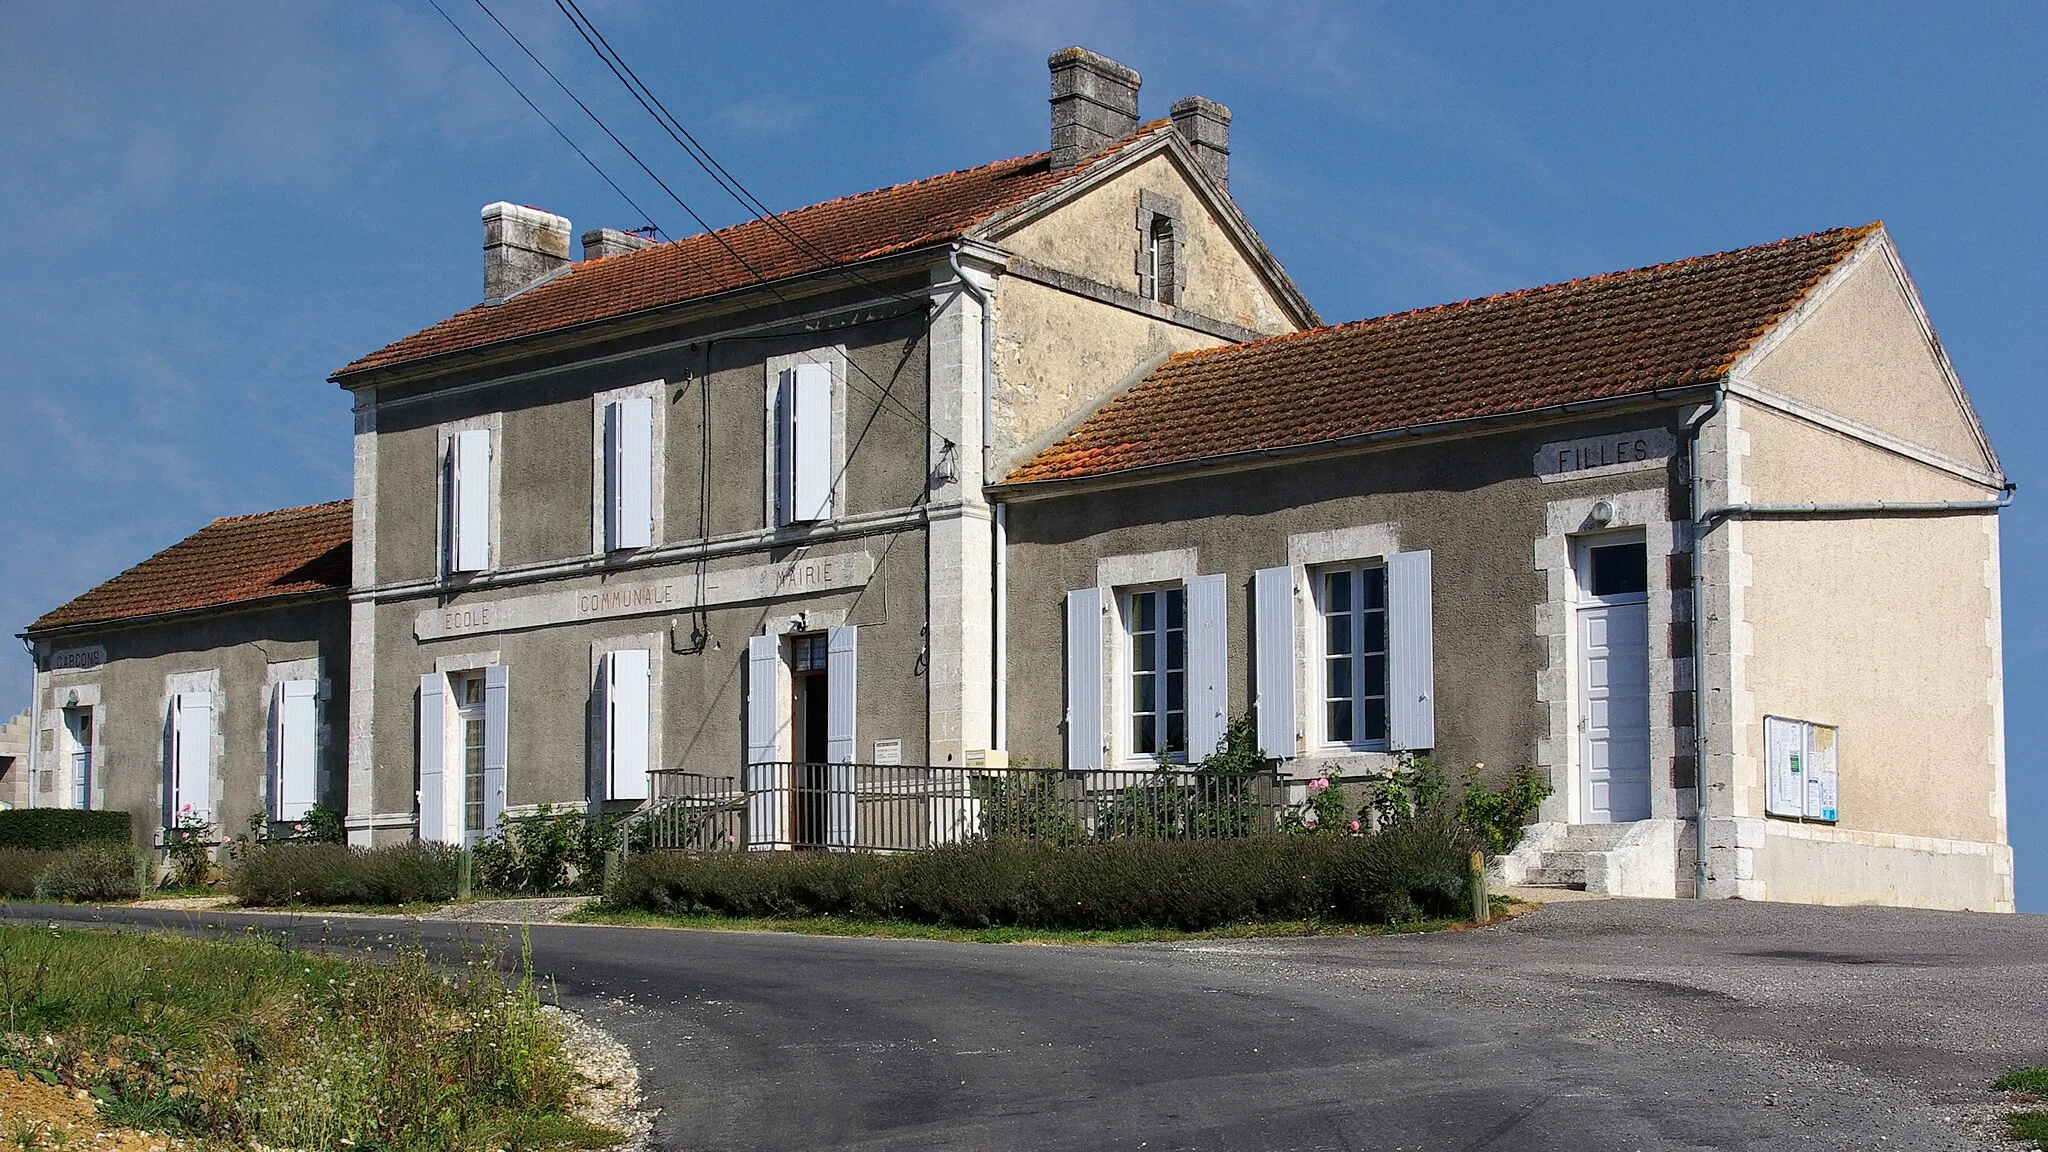 Photo showing: City hall of Courgeac, Charente, France.